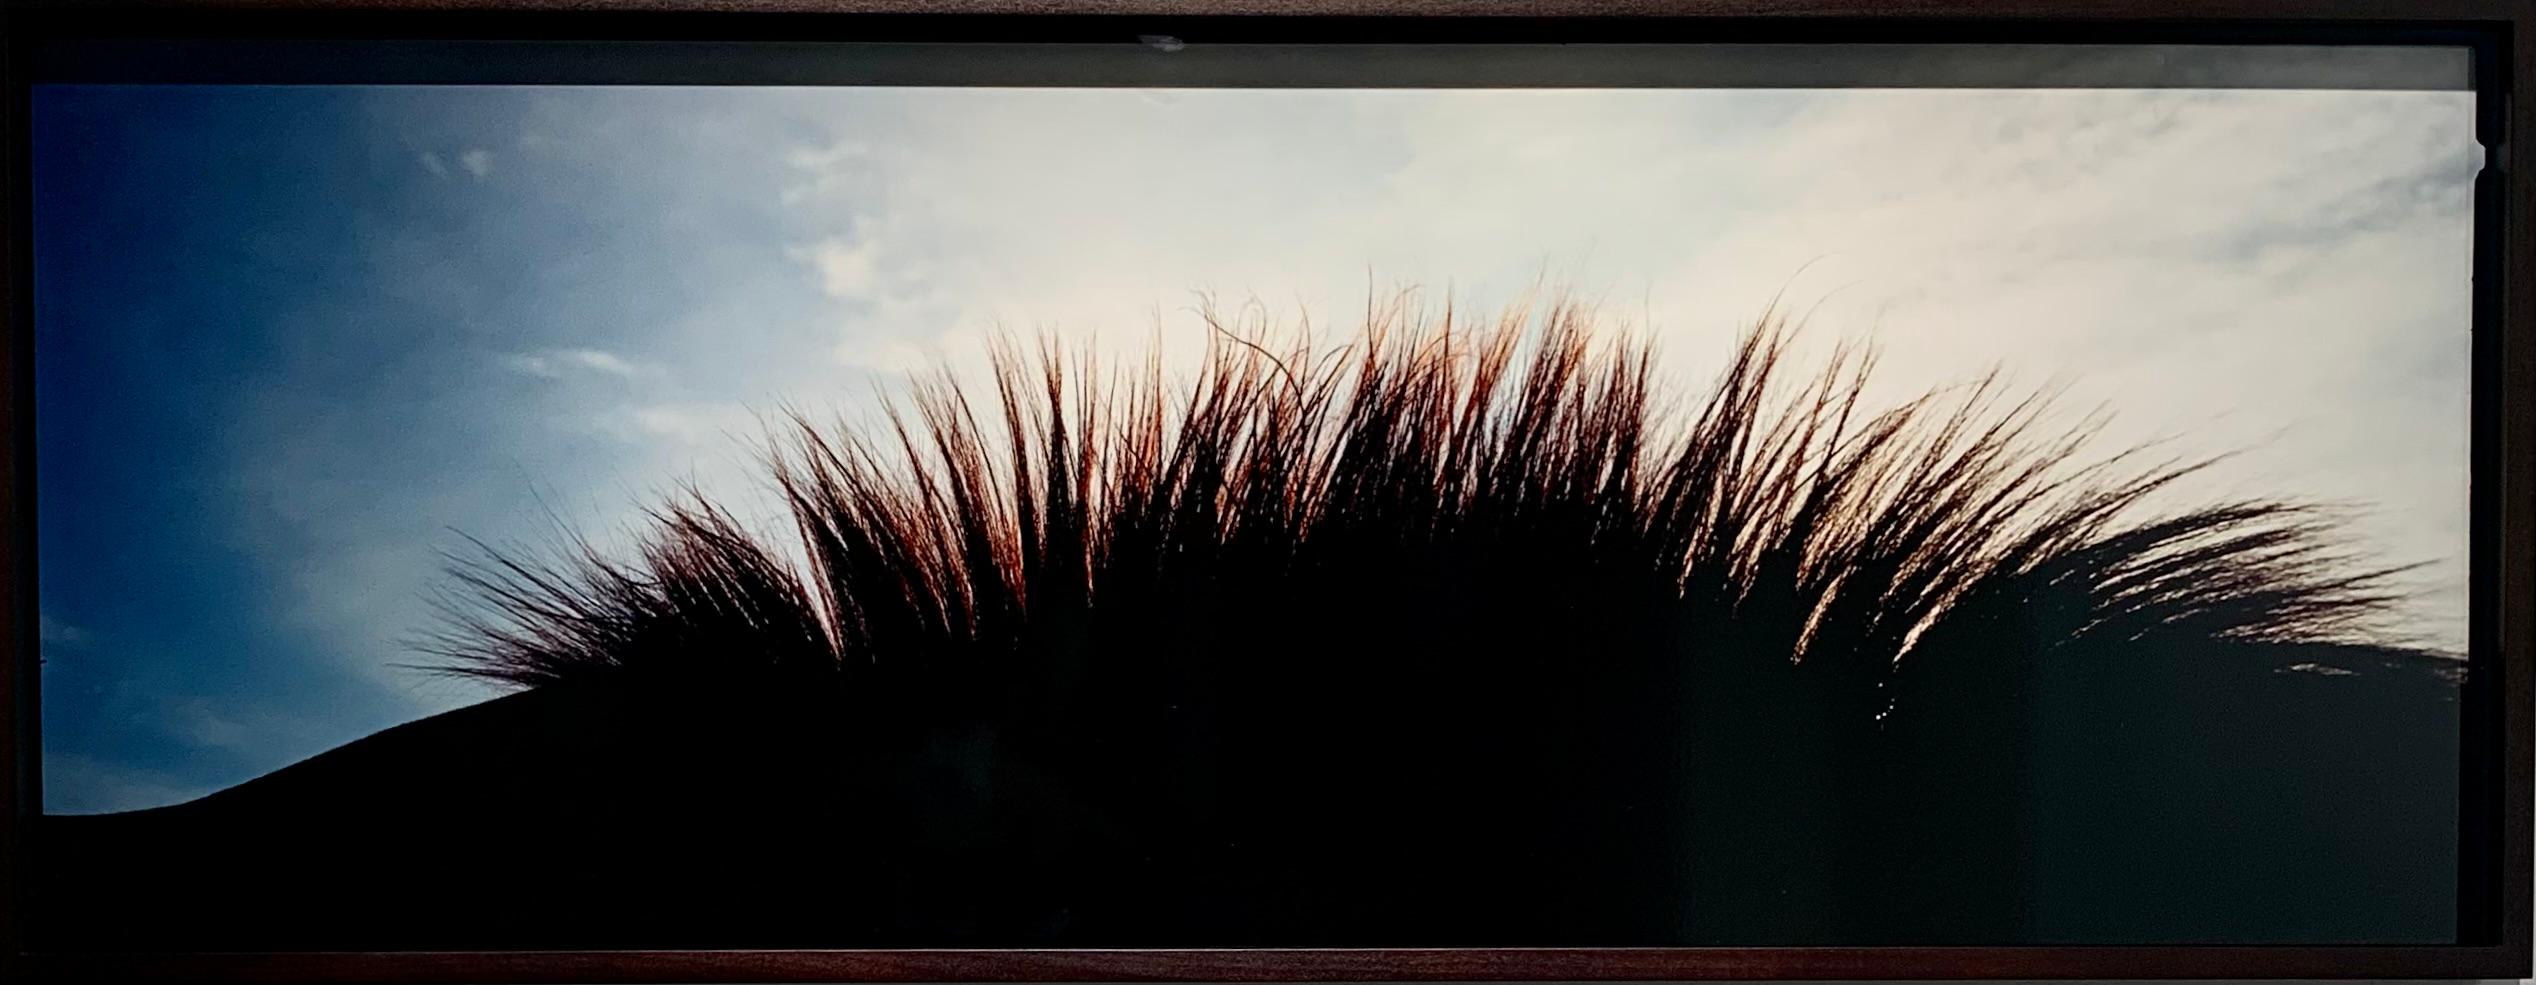 Noverre - Horse Landscape 2, 'Mane', 2003
C-type Hand Print, Mounted on Aluminium, Custom framed, Museum low glare, UV protective art glass
36.5 x 94 cm / 14.5 x 37 inches approx.
Edition of 5 only
This piece is part of (after) Whistlejacket - An